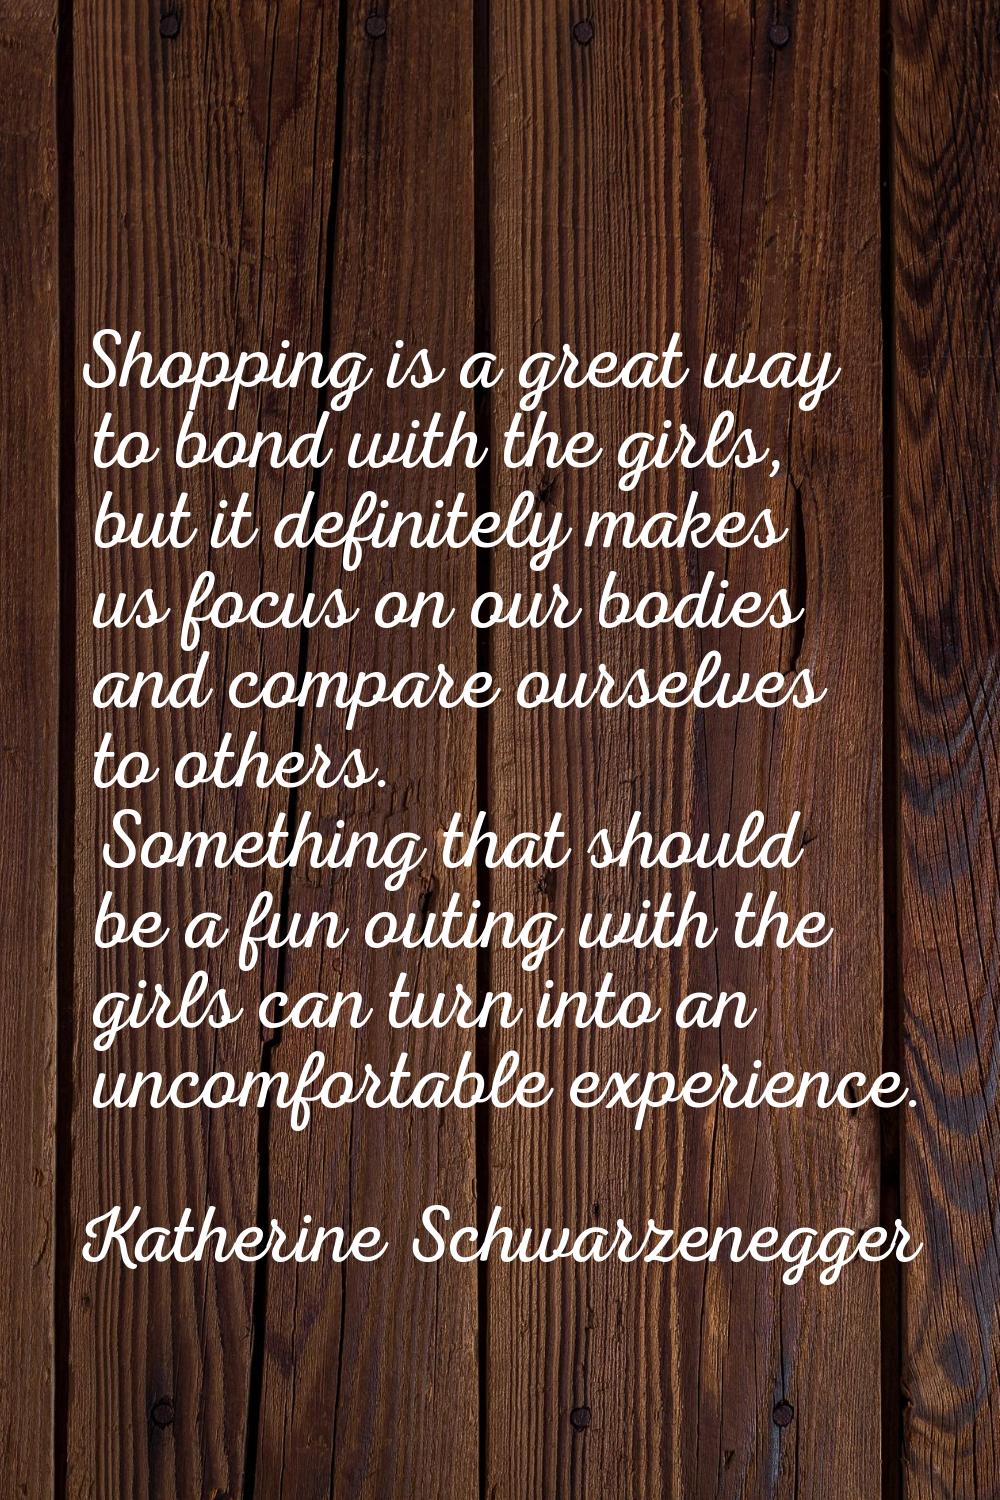 Shopping is a great way to bond with the girls, but it definitely makes us focus on our bodies and 